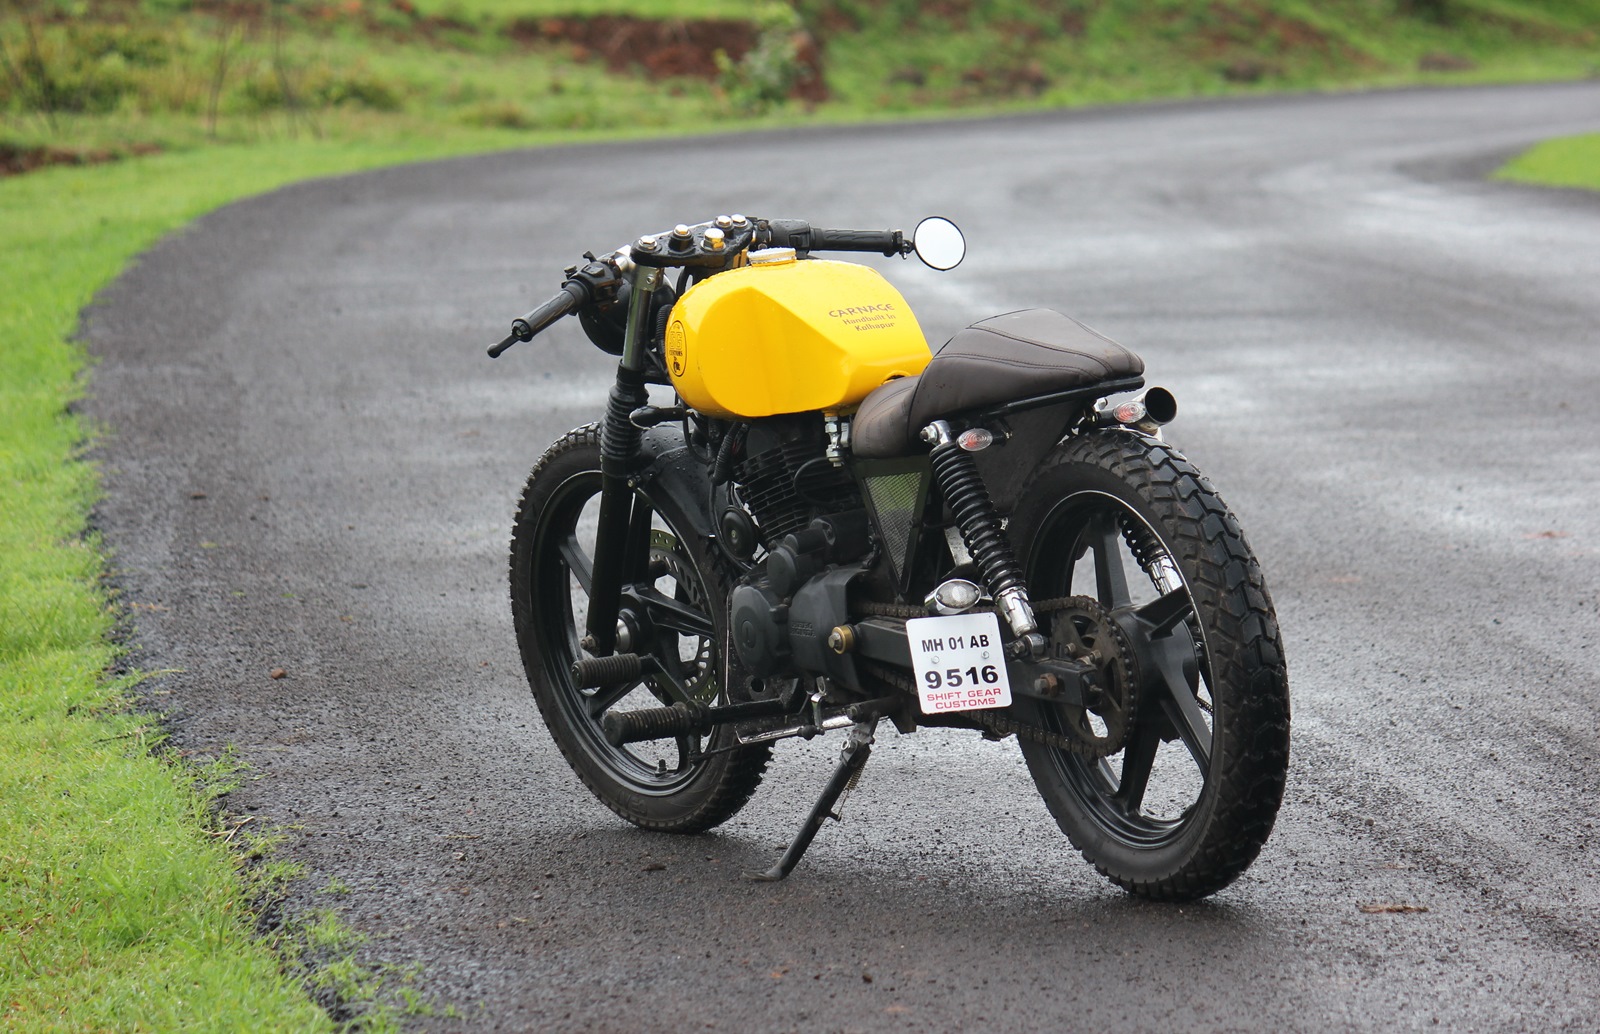 Hybrid Of Cafe Racer And Scrambler Check Out Carnage From Sg Customs